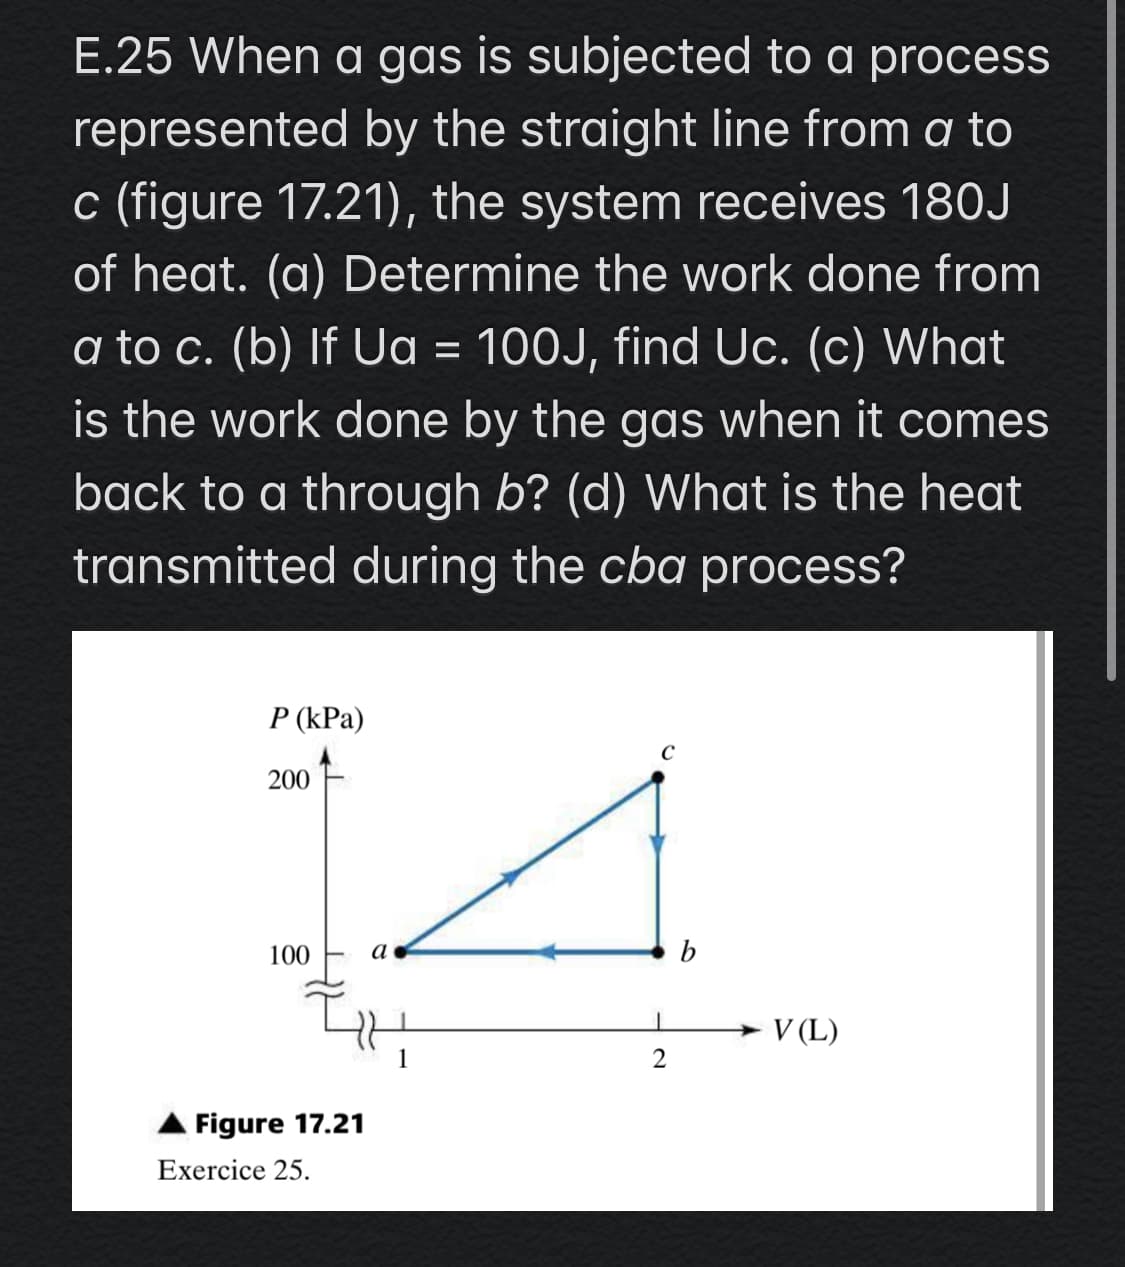 E.25 When a gas is subjected to a process
represented by the straight line from a to
c (figure 17.21), the system receives 180J
of heat. (a) Determine the work done from
a to c. (b) If Ua = 100J, find Uc. (c) What
%3D
is the work done by the gas when it comes
back to a through b? (d) What is the heat
transmitted during the cba process?
P (kPa)
200
100
а
b
V (L)
2
Figure 17.21
Exercice 25.
